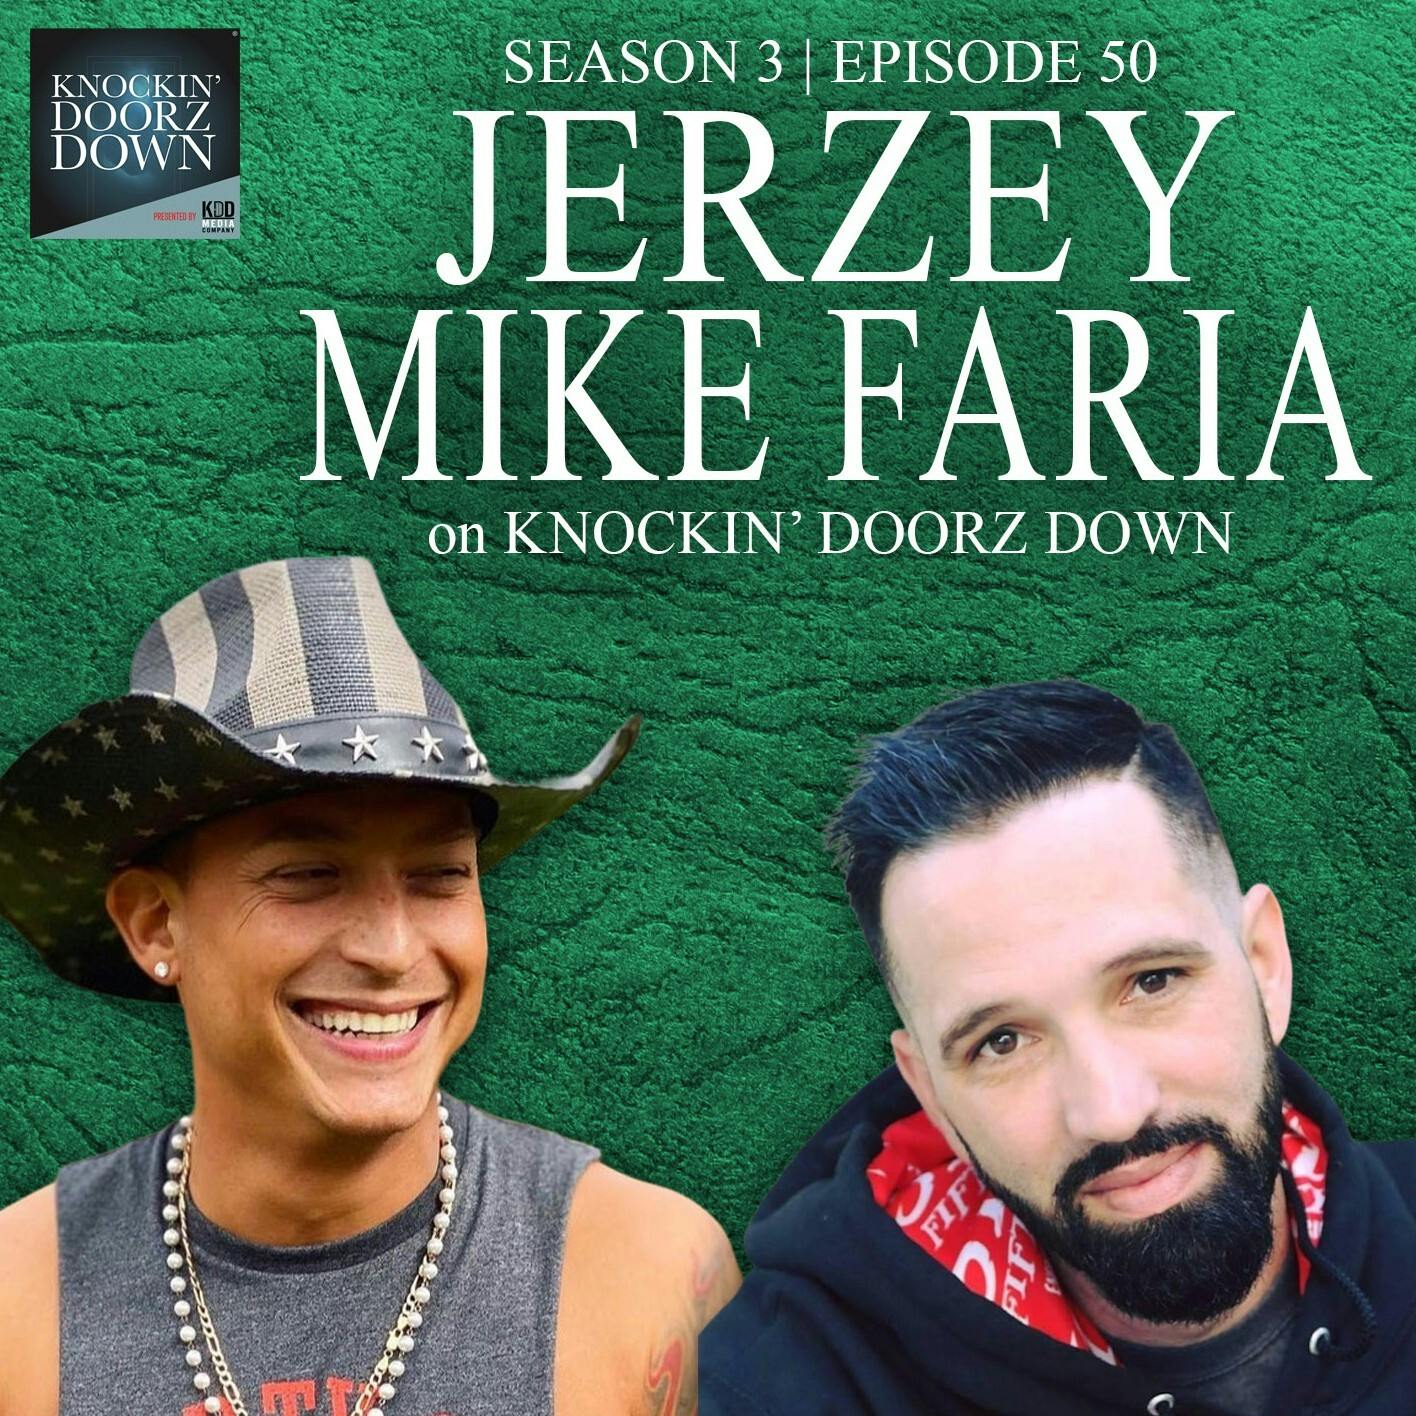 Jerzey Mike Faria | Alcohol Fueled Coma, Growing Up With Absent Male Figure, Sobriety And Fatherhood